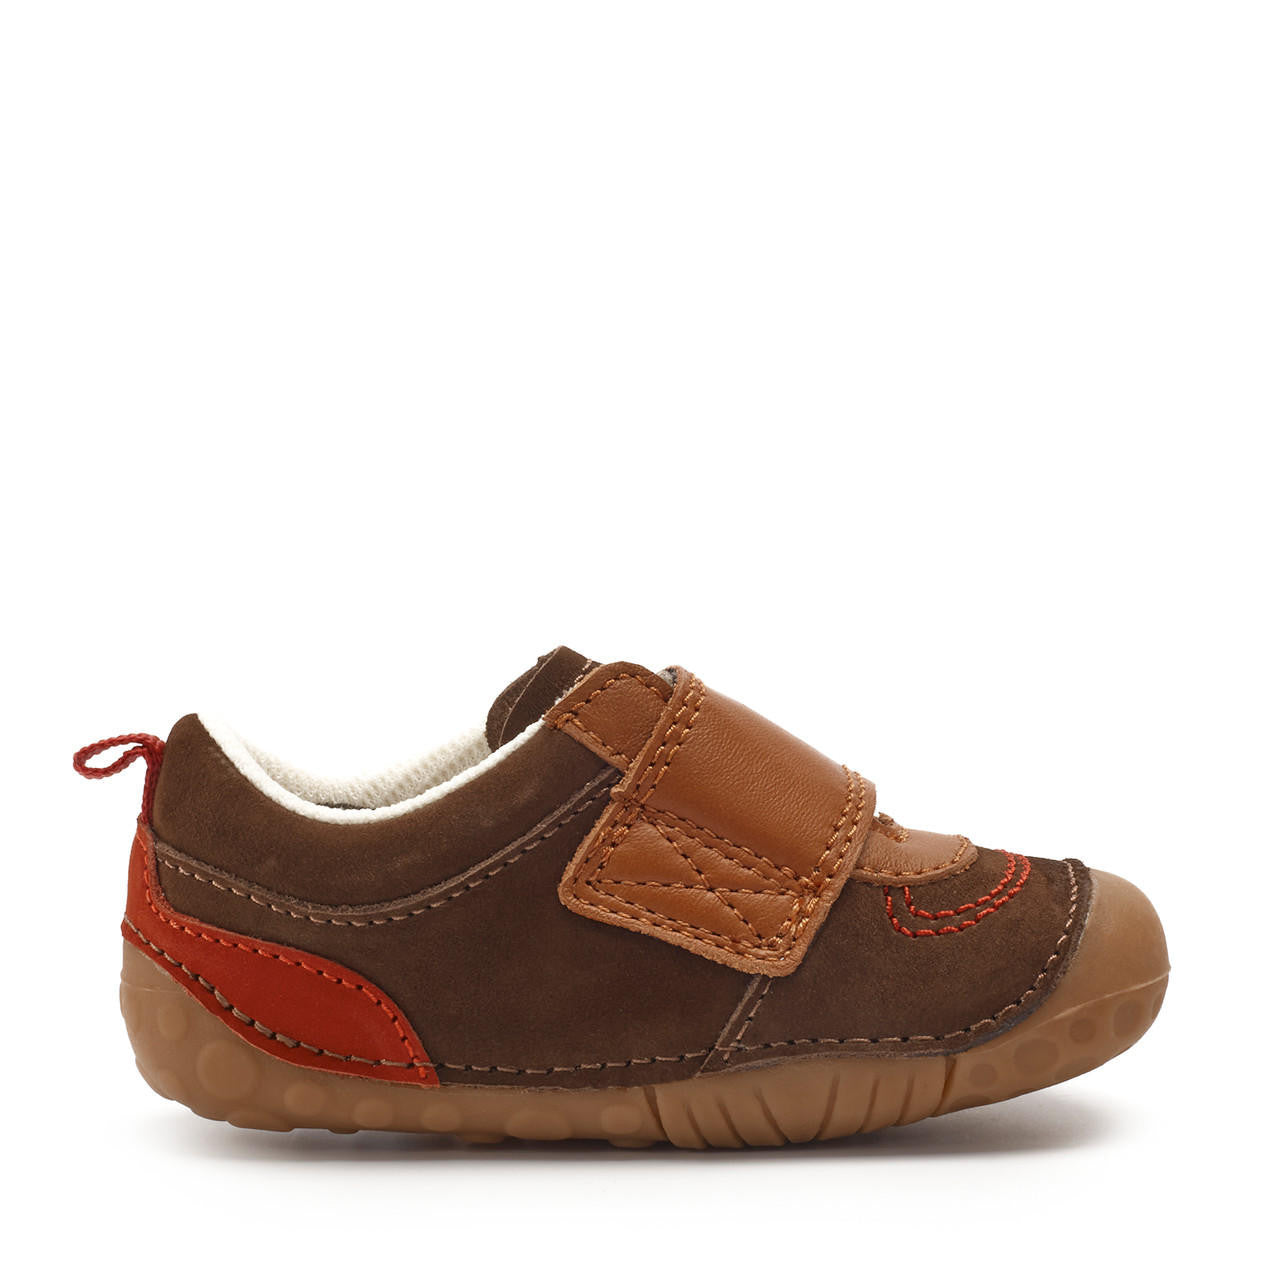 A boys pre walker by Start Rite,style Shuffle, in Brown Nubuck and Tan leather with single velcro fastening. Left side view.